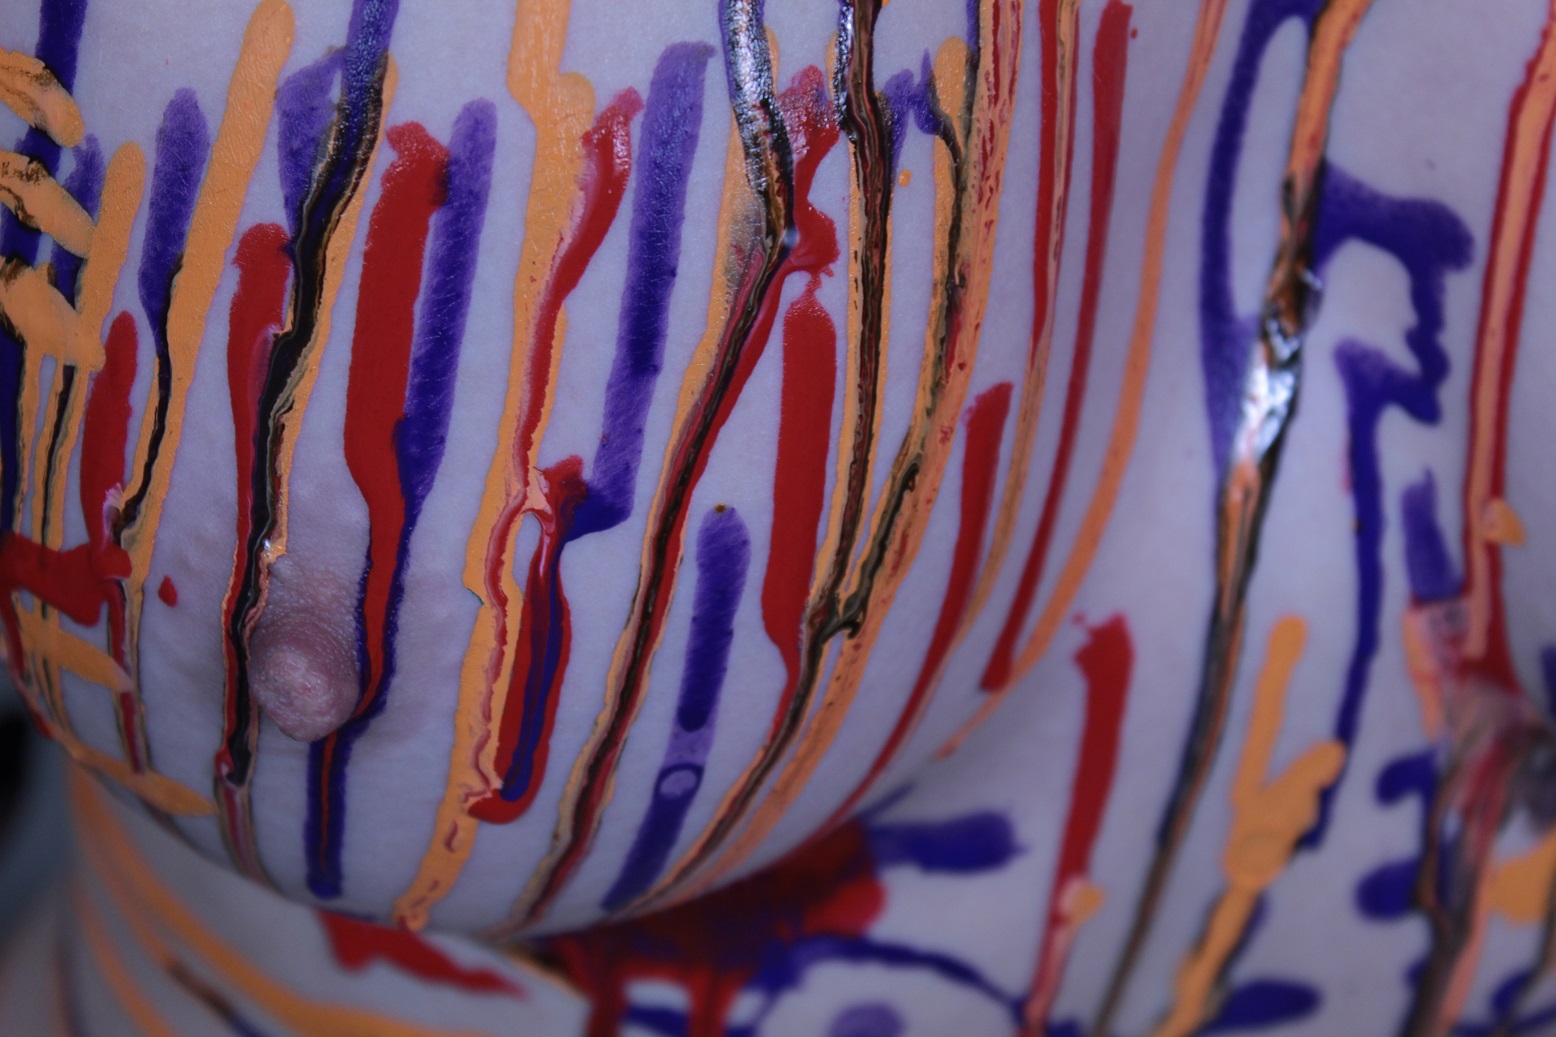 Orange, Blue and Red body paint dripping on female torso